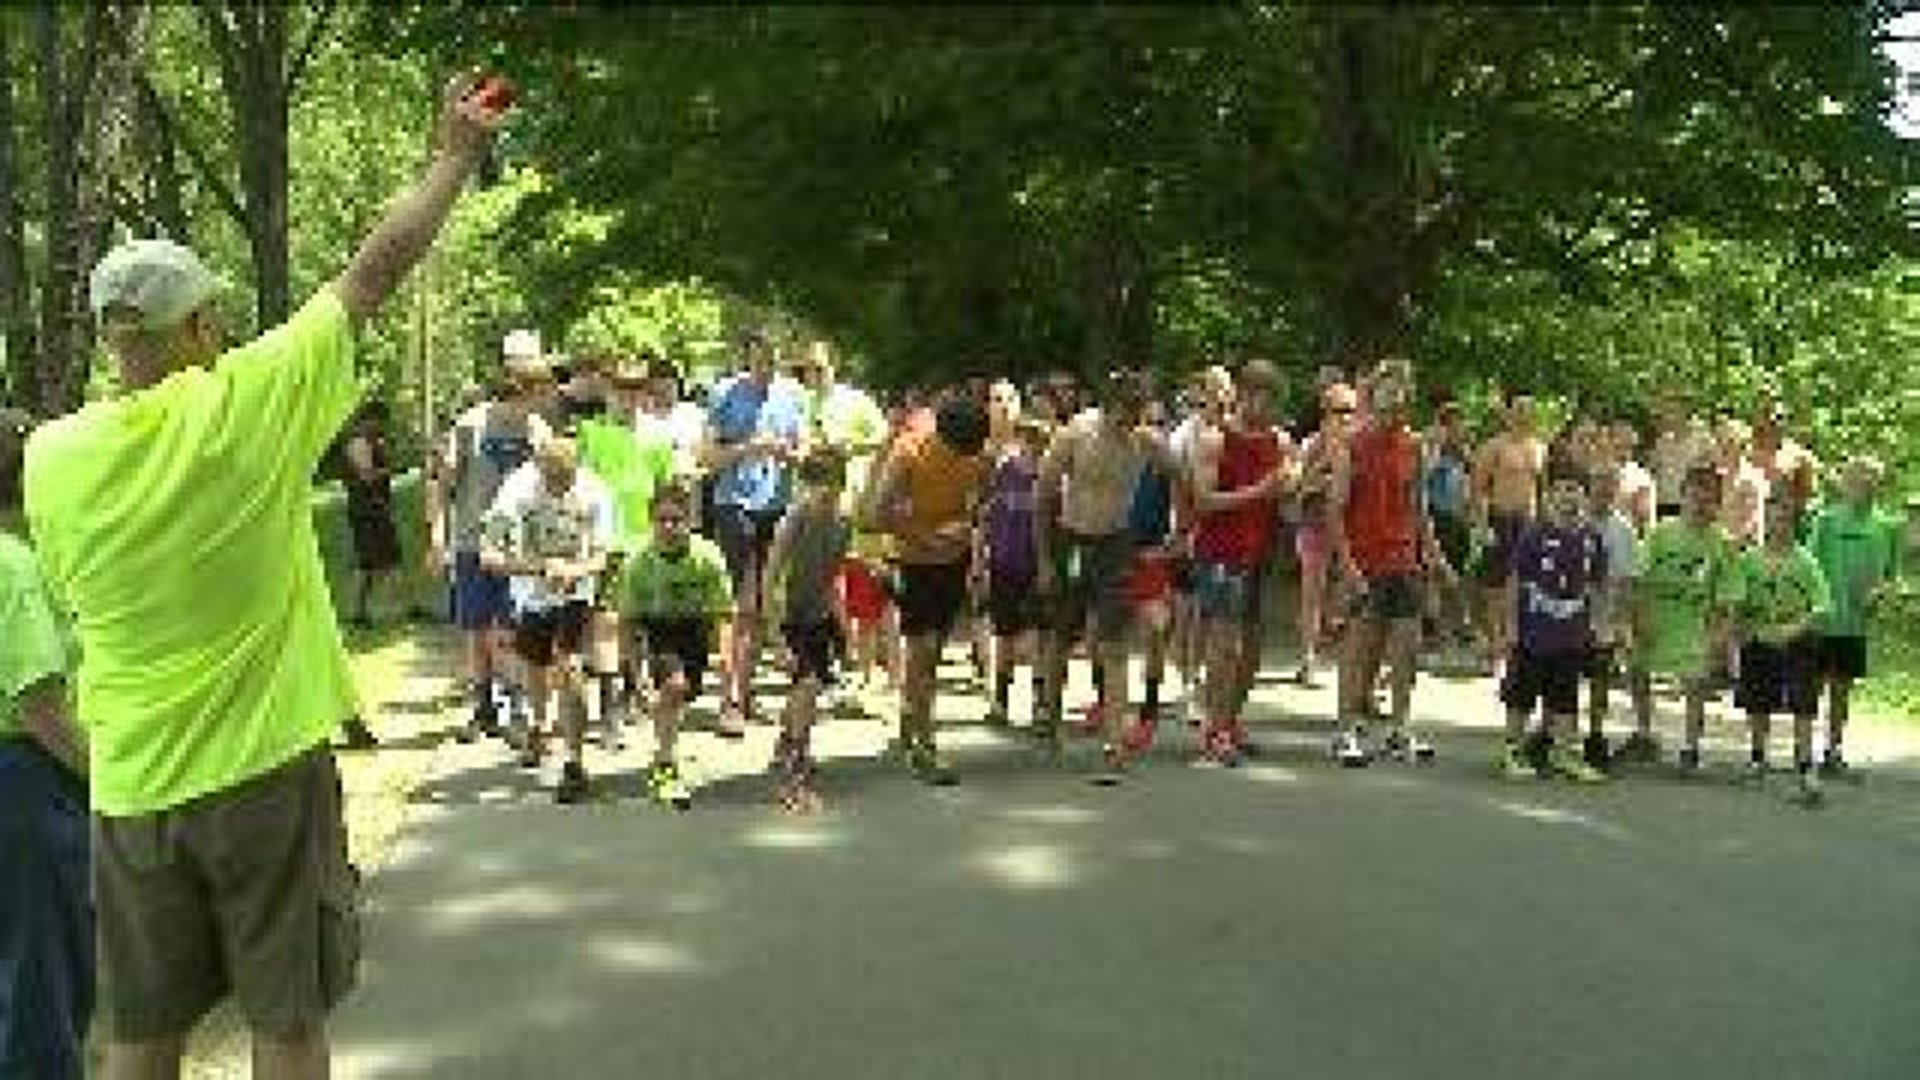 Runners Raise Awareness for Suicide Prevention